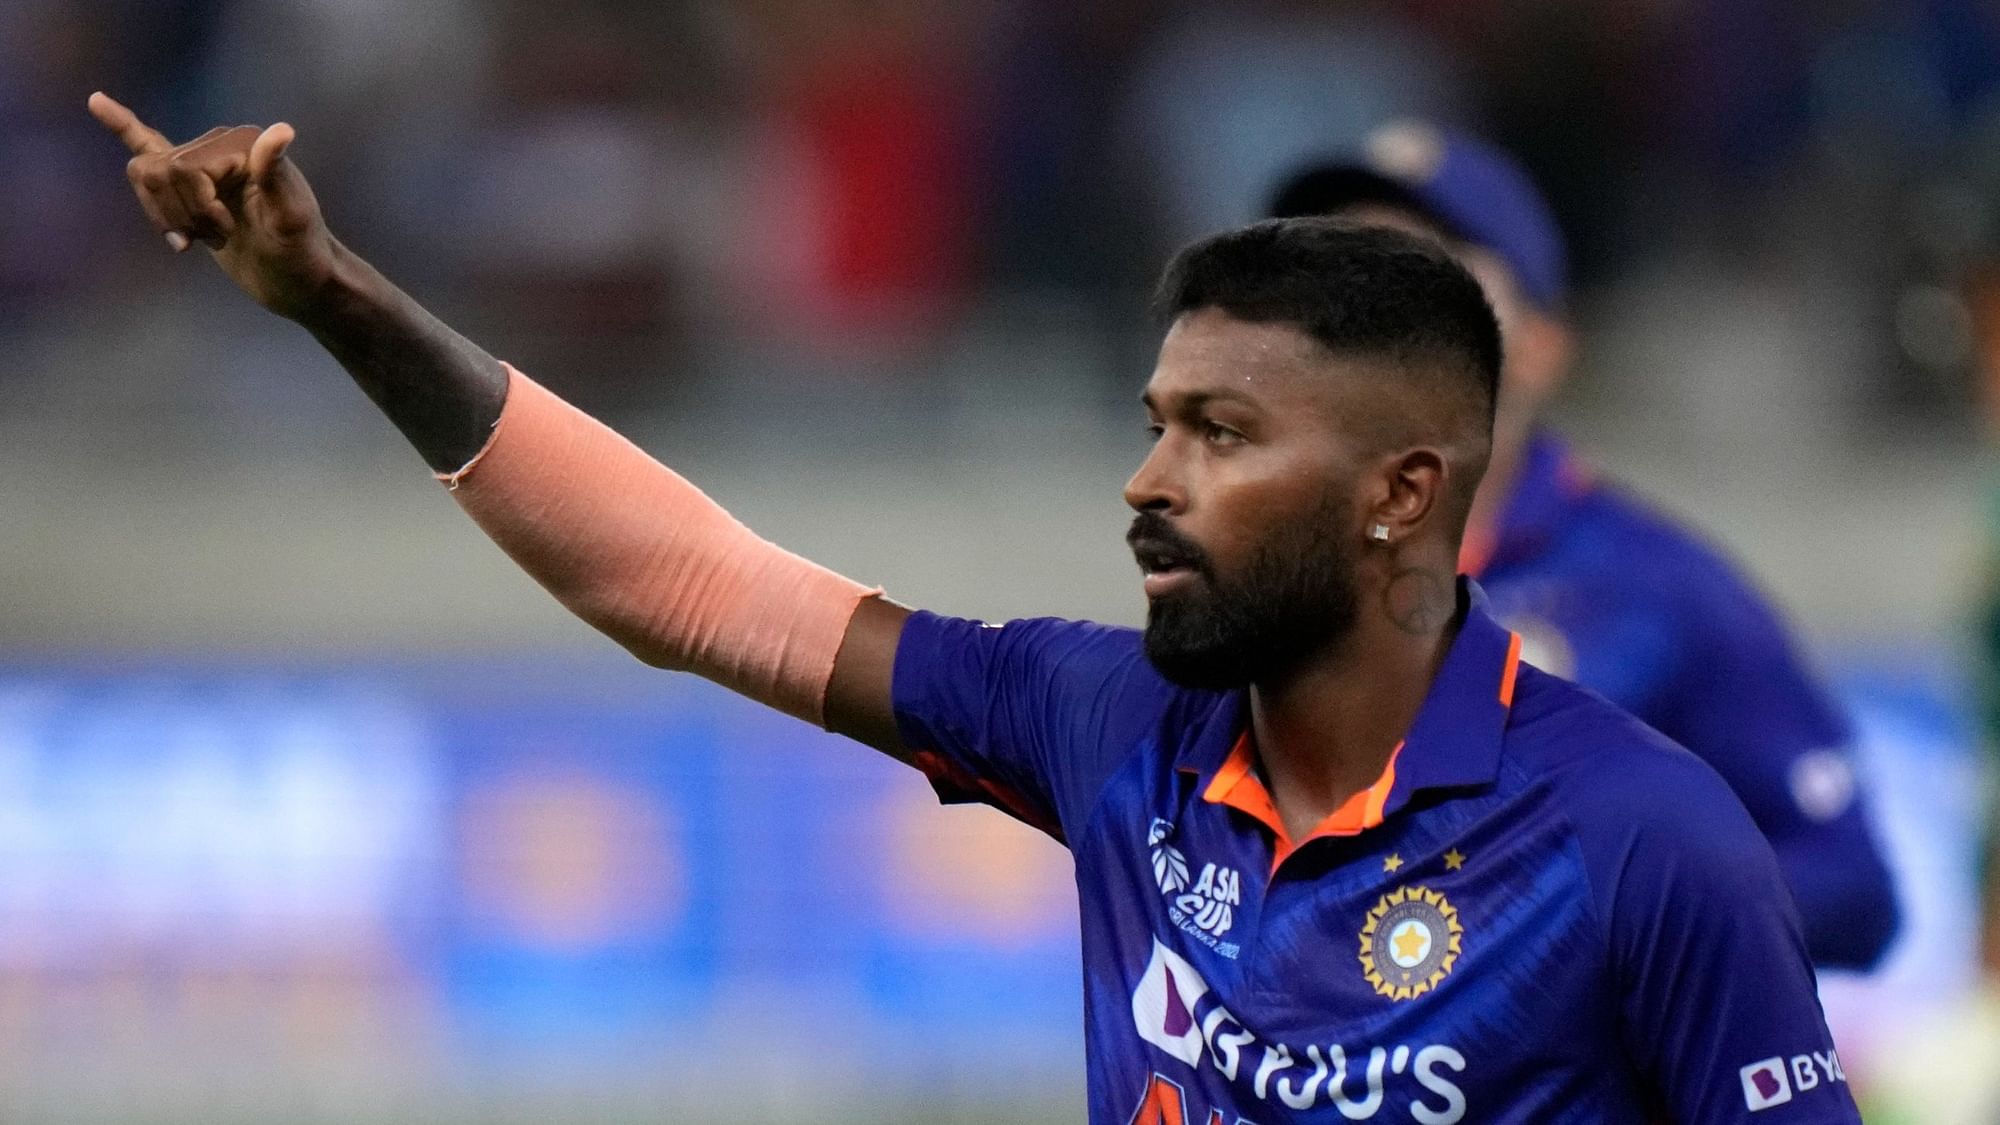 <div class="paragraphs"><p>All-rounder Hardik Pandya played a key role in helping India register a five-wicket win over Pakistan in Asia Cup 2022 Group A clash in Dubai on Sunday.&nbsp;</p></div>